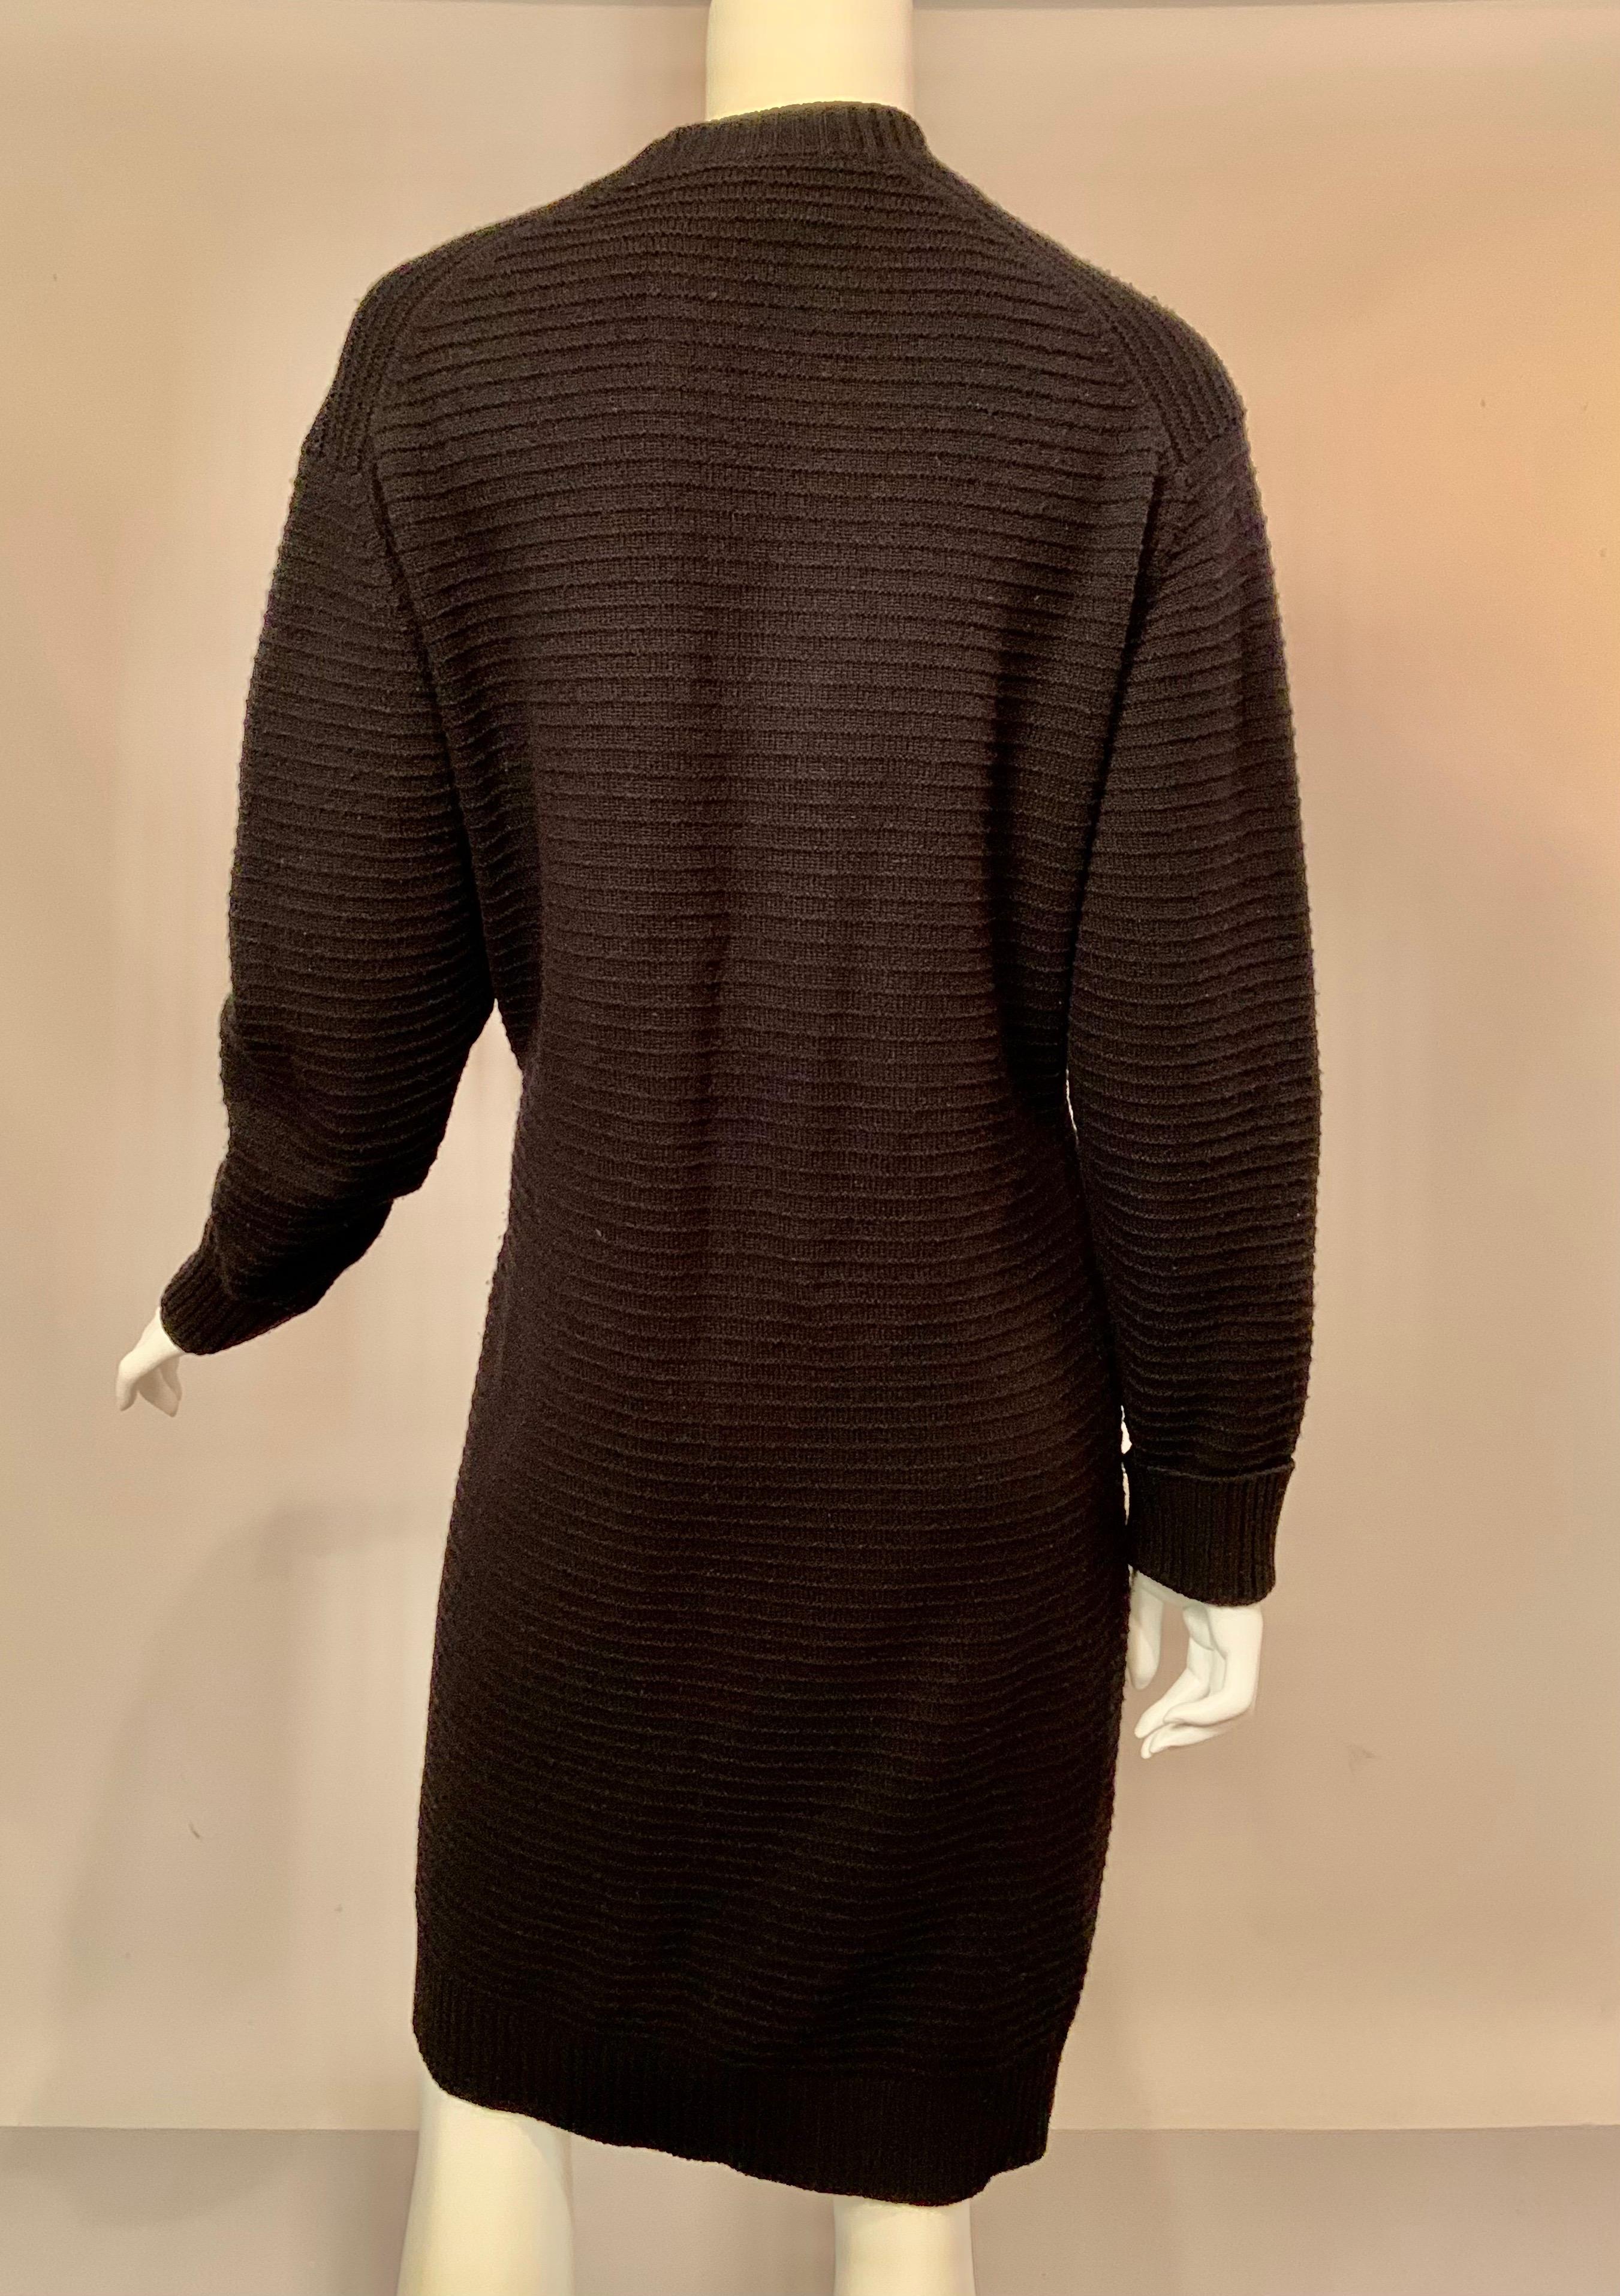 Chanel Black Cashmere Long Cardigan Sweater, Larger Size 7